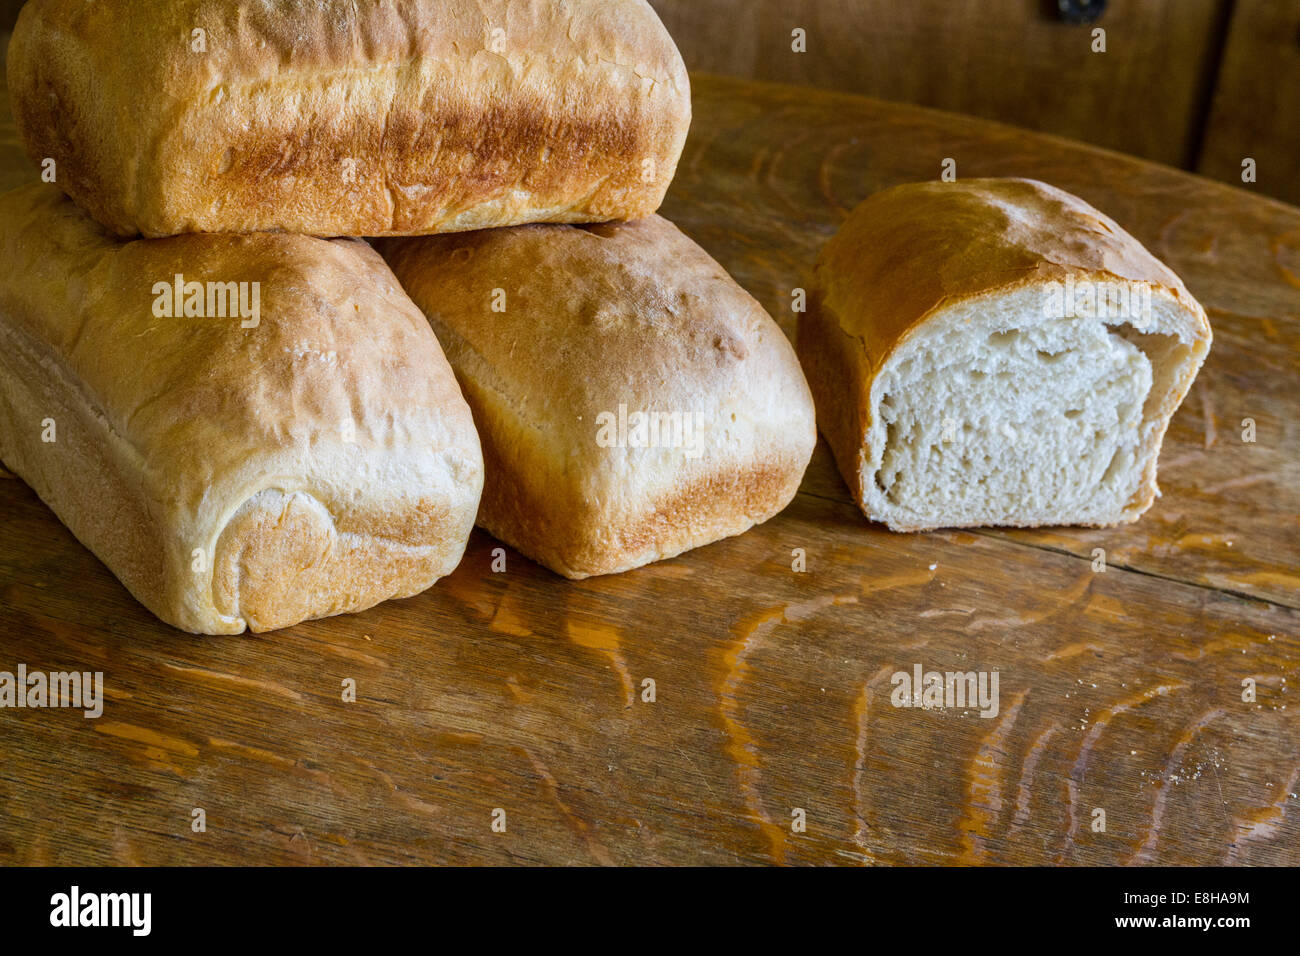 Loaves of freshly baked home made bread Stock Photo